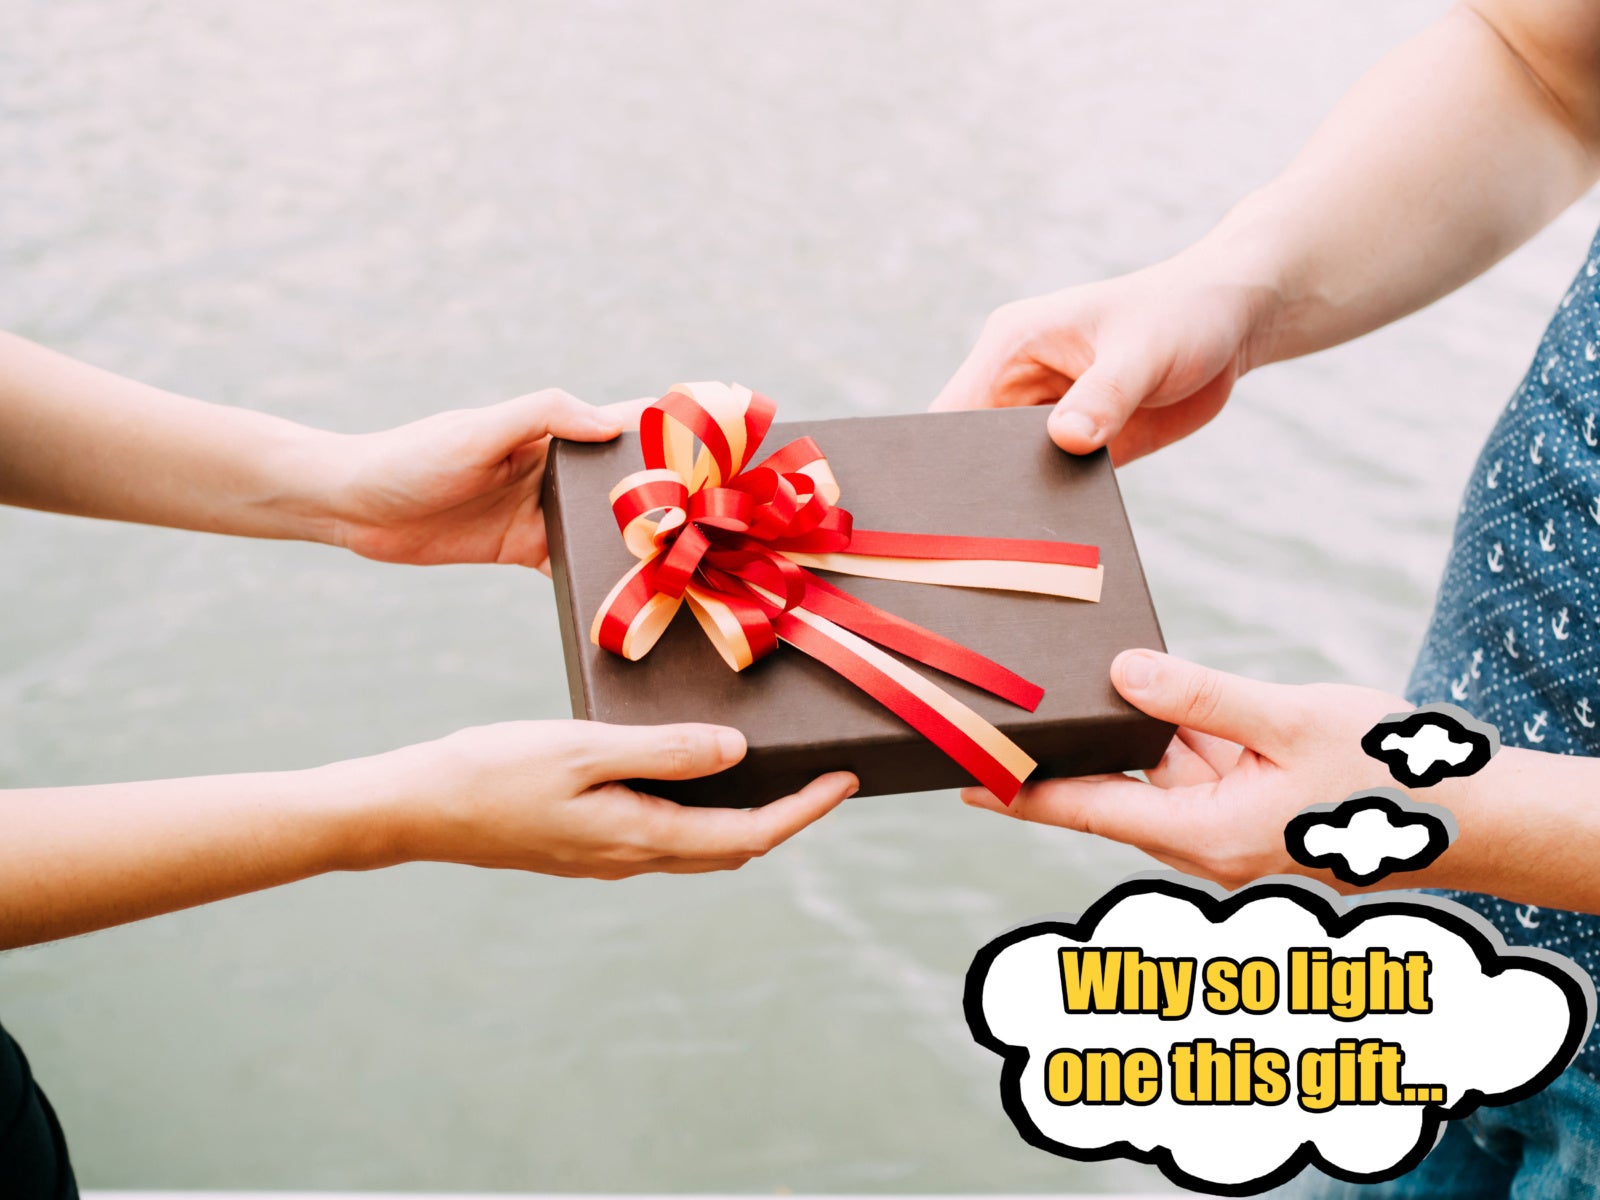 X Common Types of Malaysians You'll Receive a Gift From This Christmas - WORLD OF BUZZ 3